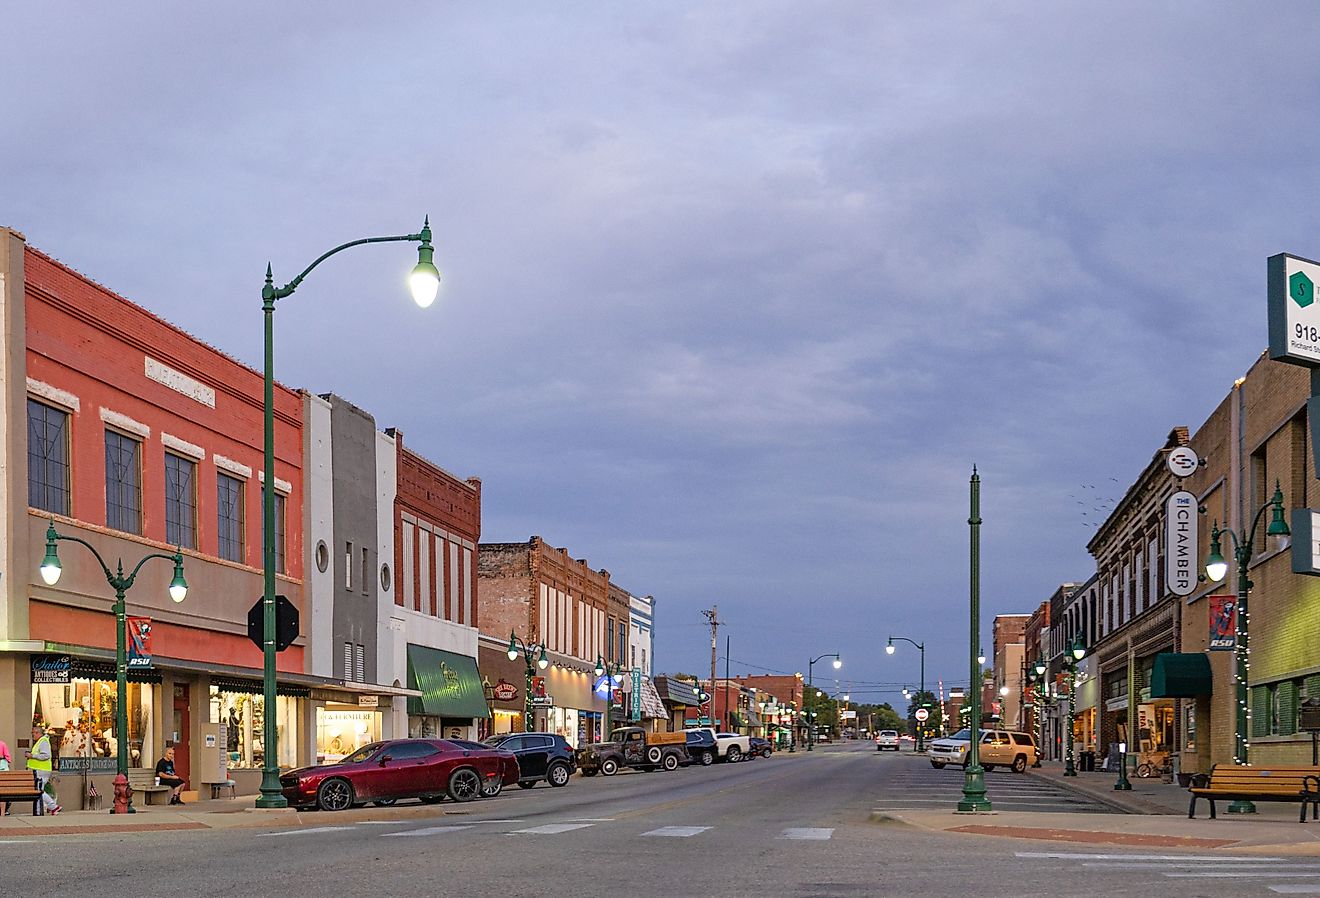 The old business district on Will Rogers Boulevard in Claremore, Oklahoma. Image credit Roberto Galan via Shutterstock.